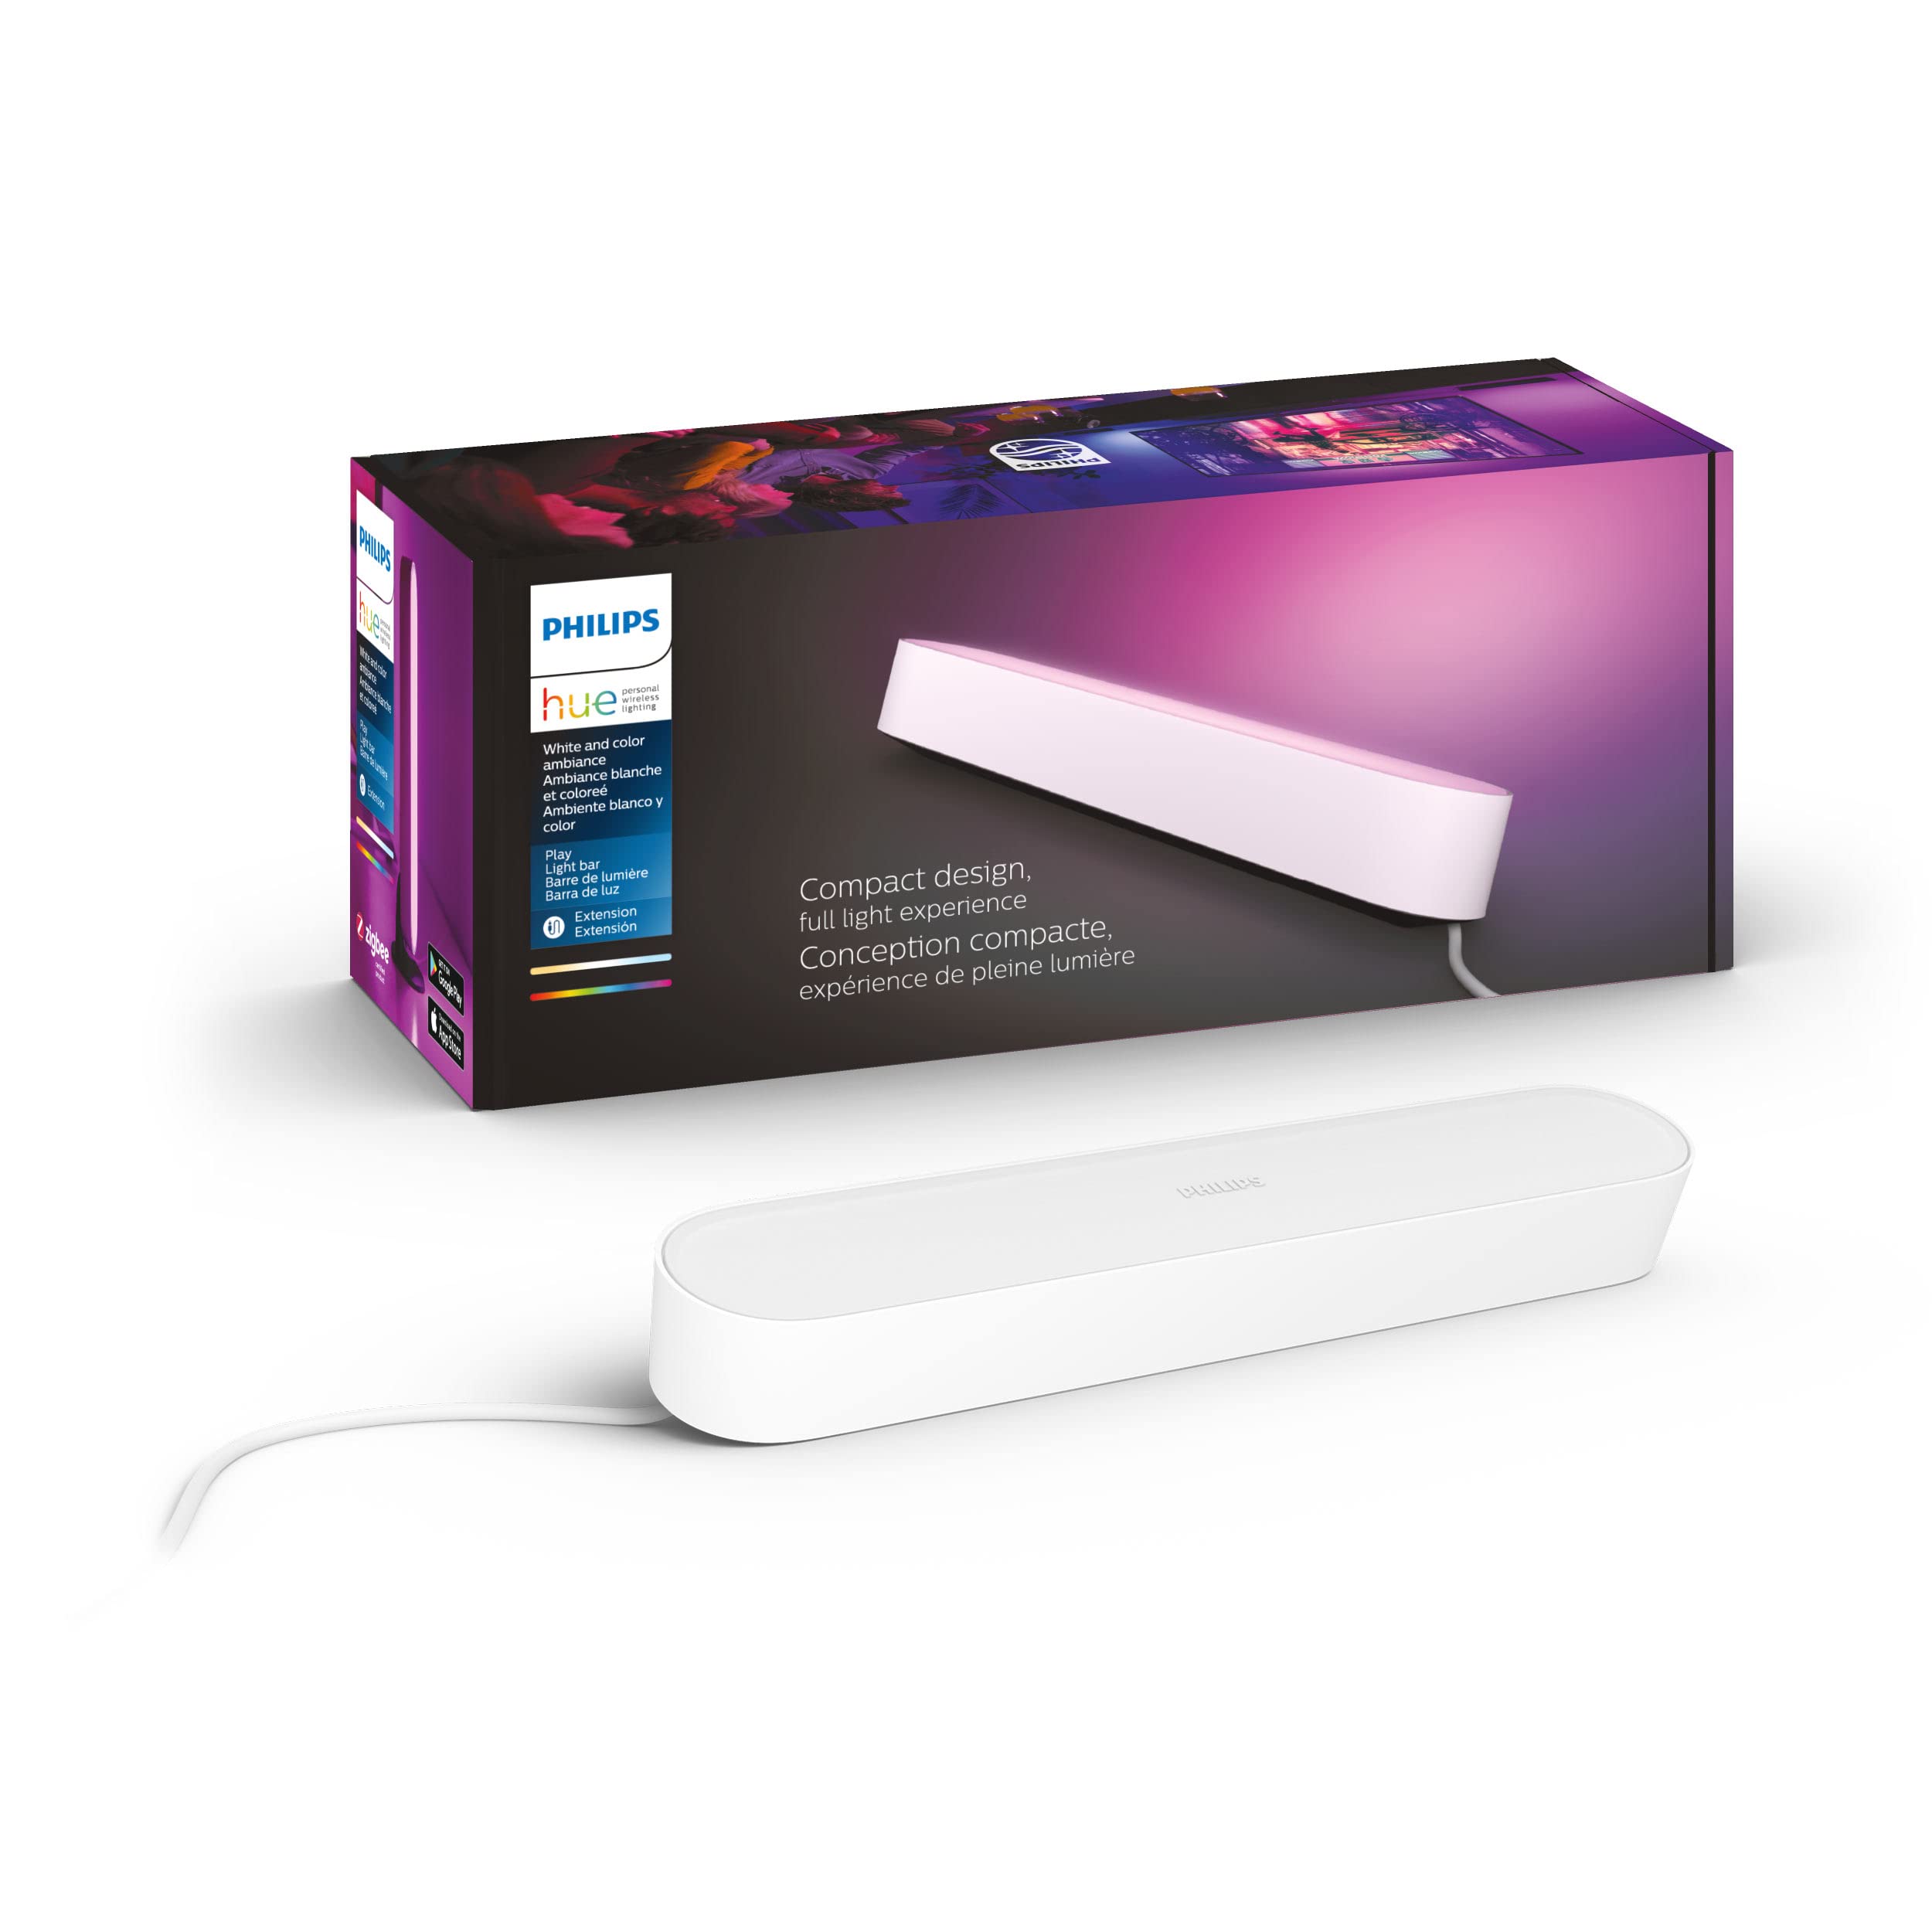 Philips Hue Play White & Color Smart Light Extension, Hub Required/NO Power supply included (Smart Lighting Compatibility with Amazon Alexa, Apple Homekit & Google Home)